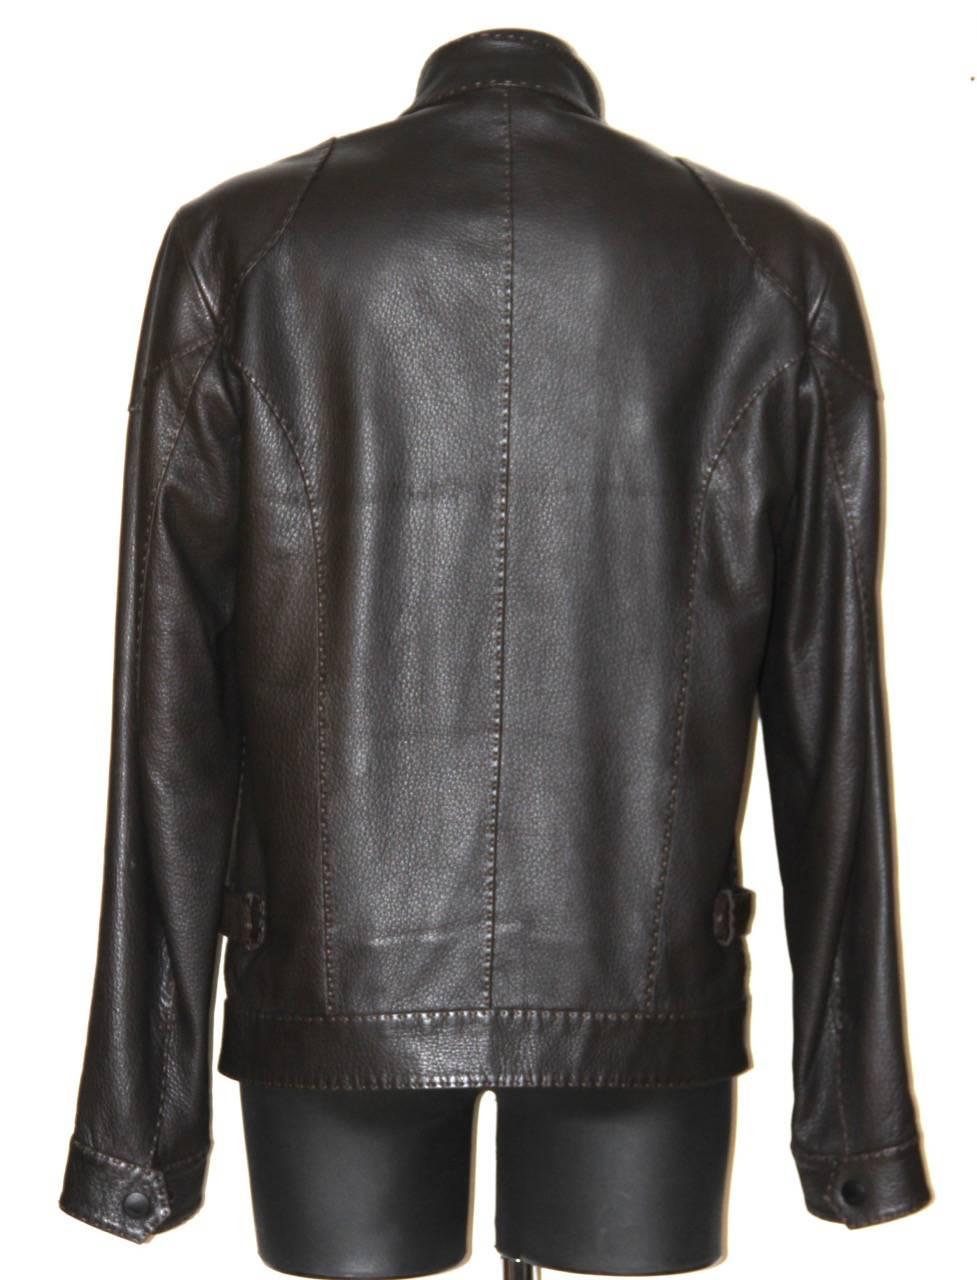 Elegant brown leather jacket from Fendi Selleria featuting tonal topstitching throughout, a mandarin collar with snap closure, snap closure cuff, two chest zip pockets, two waist slit pockets and a central front zip closure and two internal